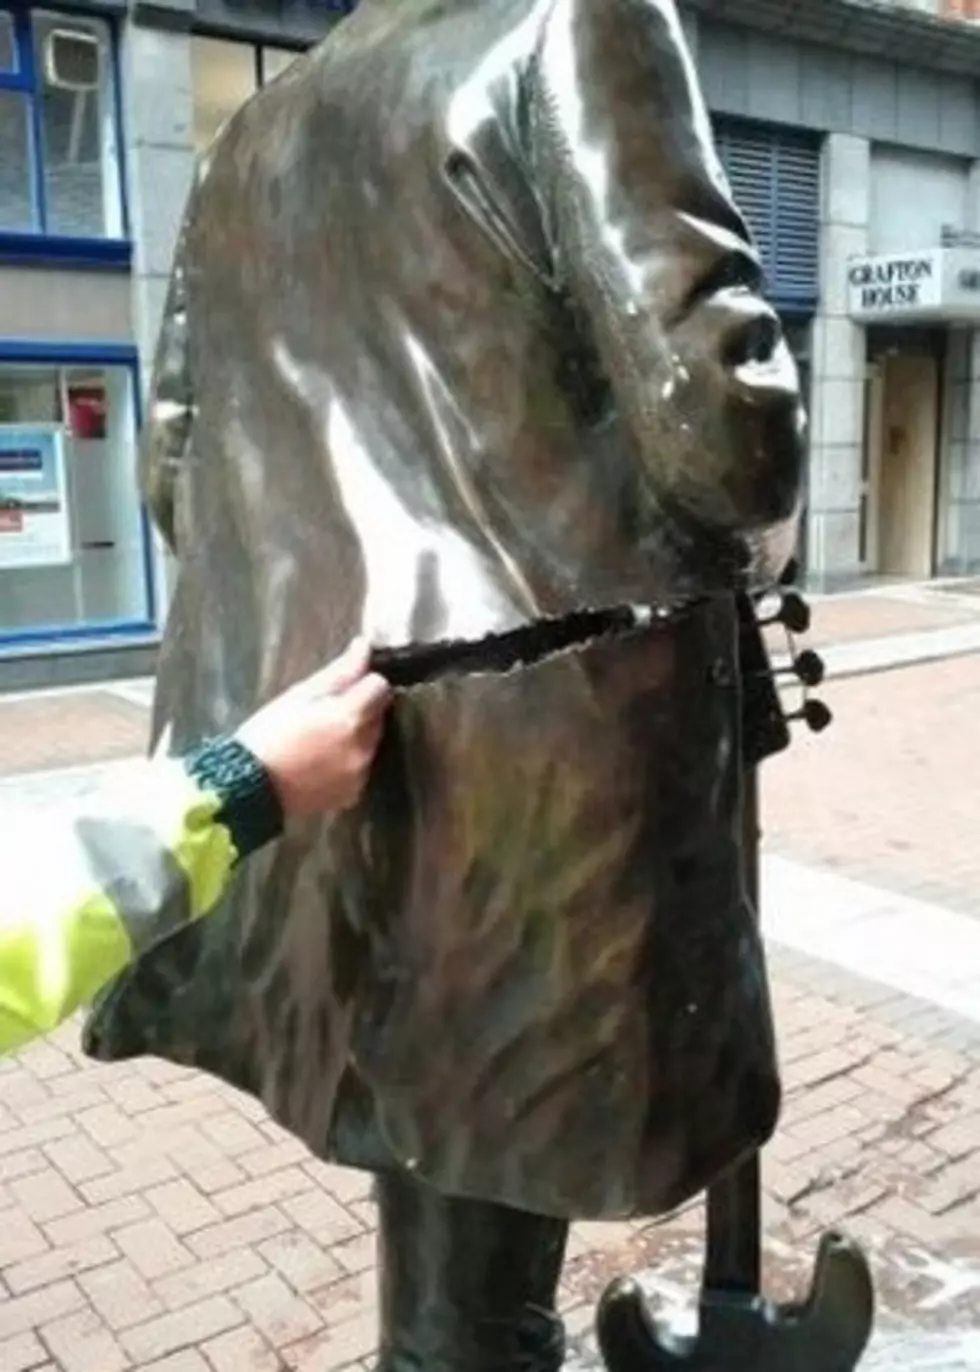 Phil Lynott Statue Damaged by Vandals